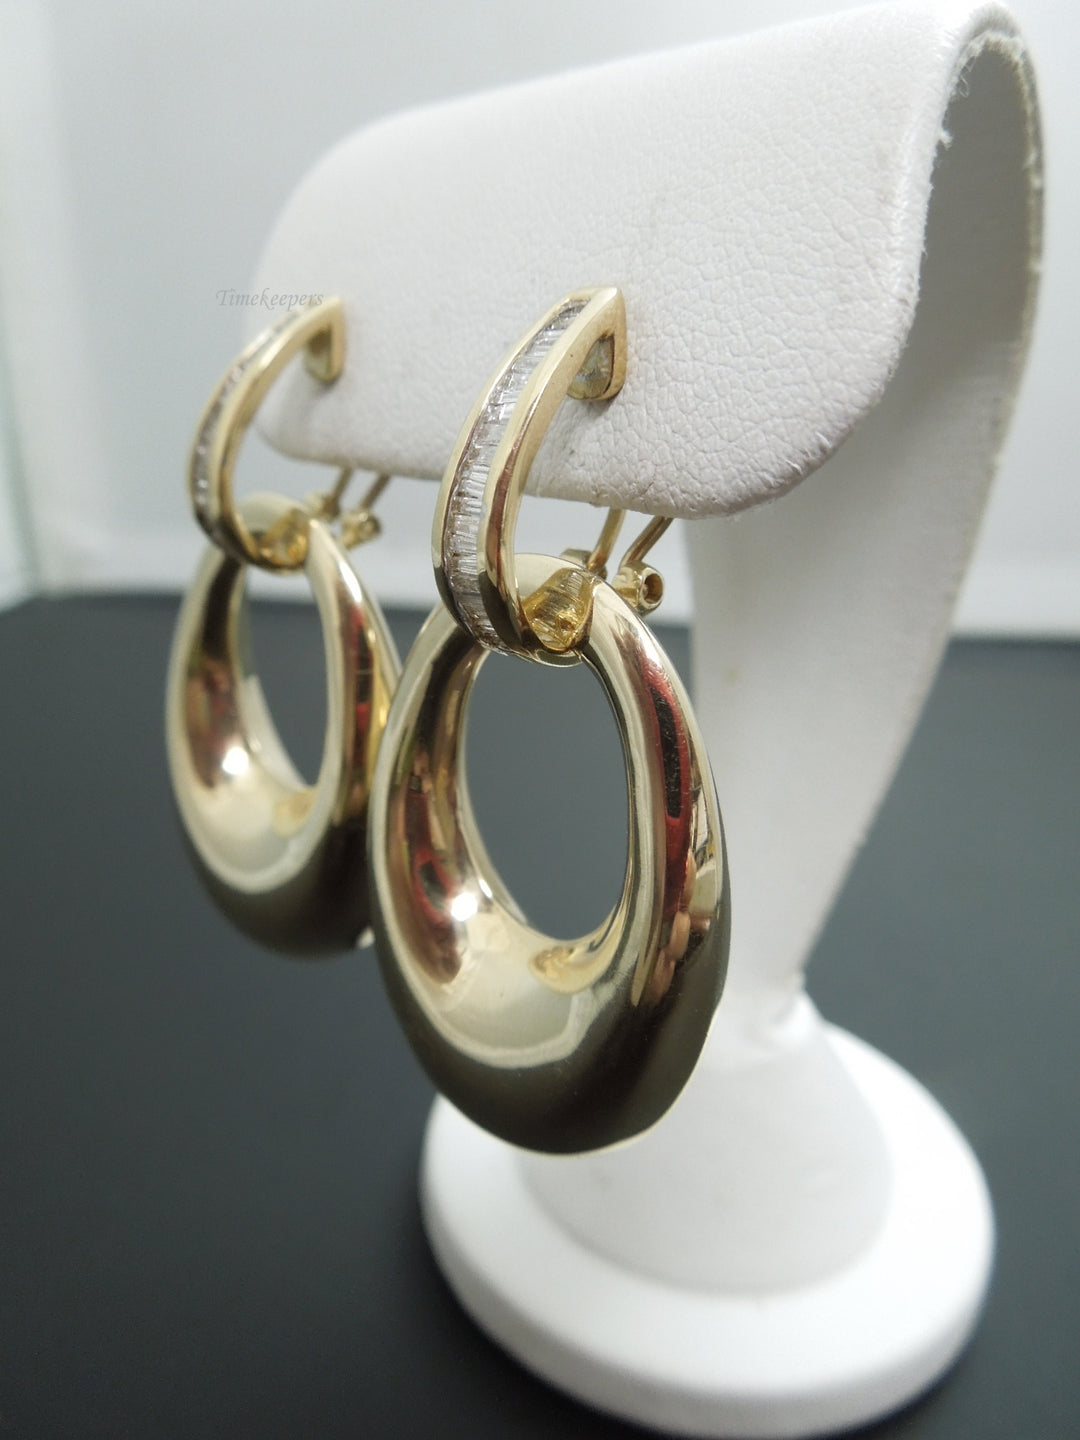 a836 Vintage Gorgeous Baguette Diamond Half Hoop Post Earrings 14k Yellow Gold With Jackets